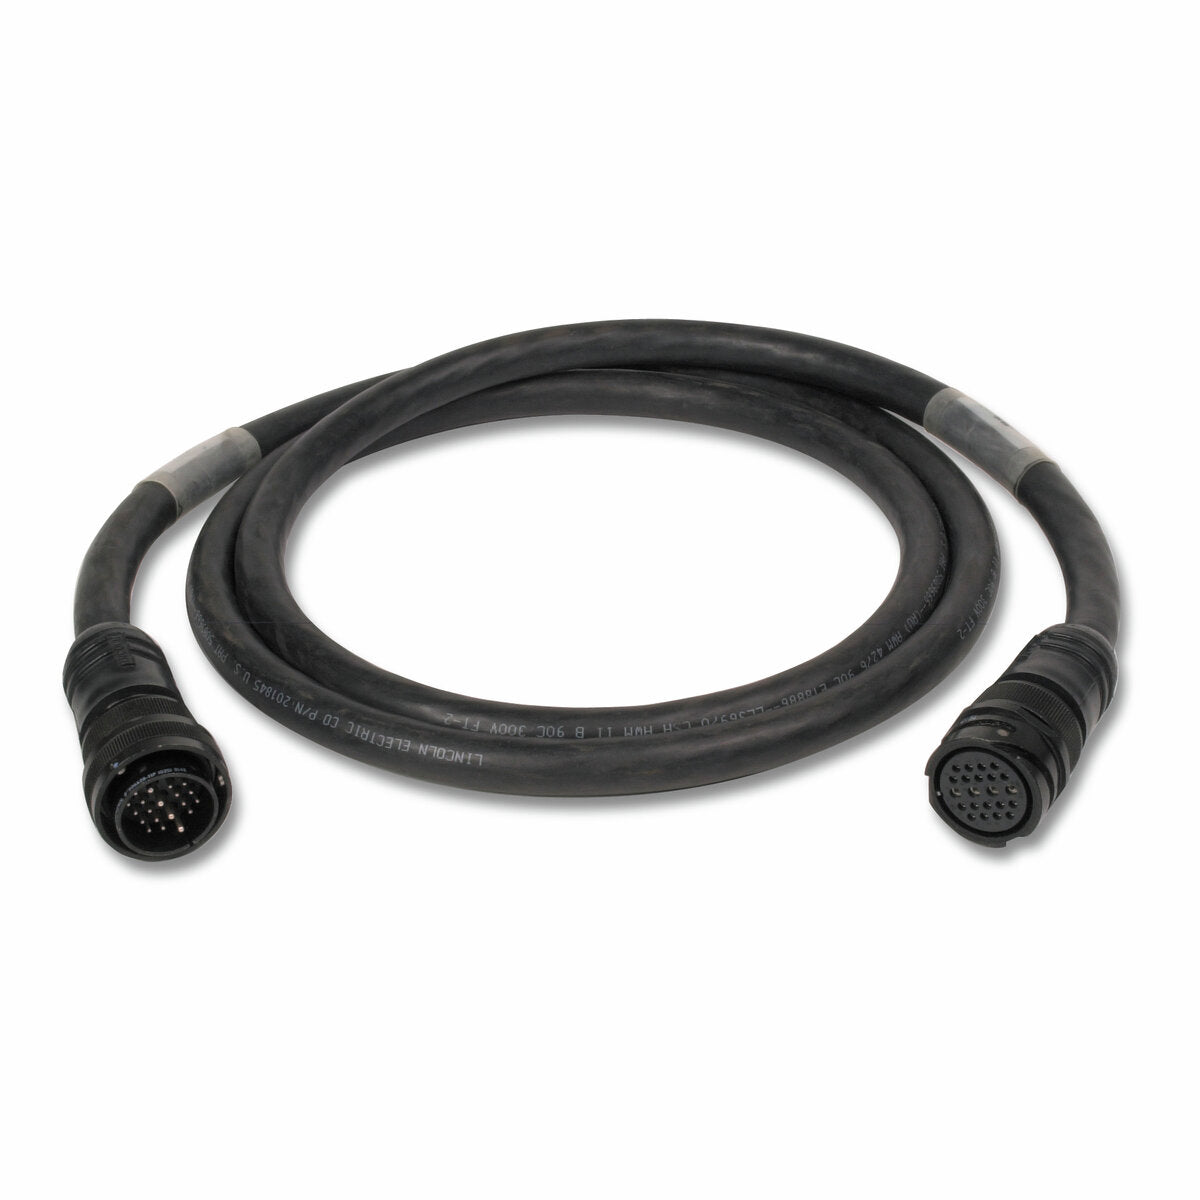 Lincoln Electric - Control Cable - 50 ft (15.2 m) - K1795-50